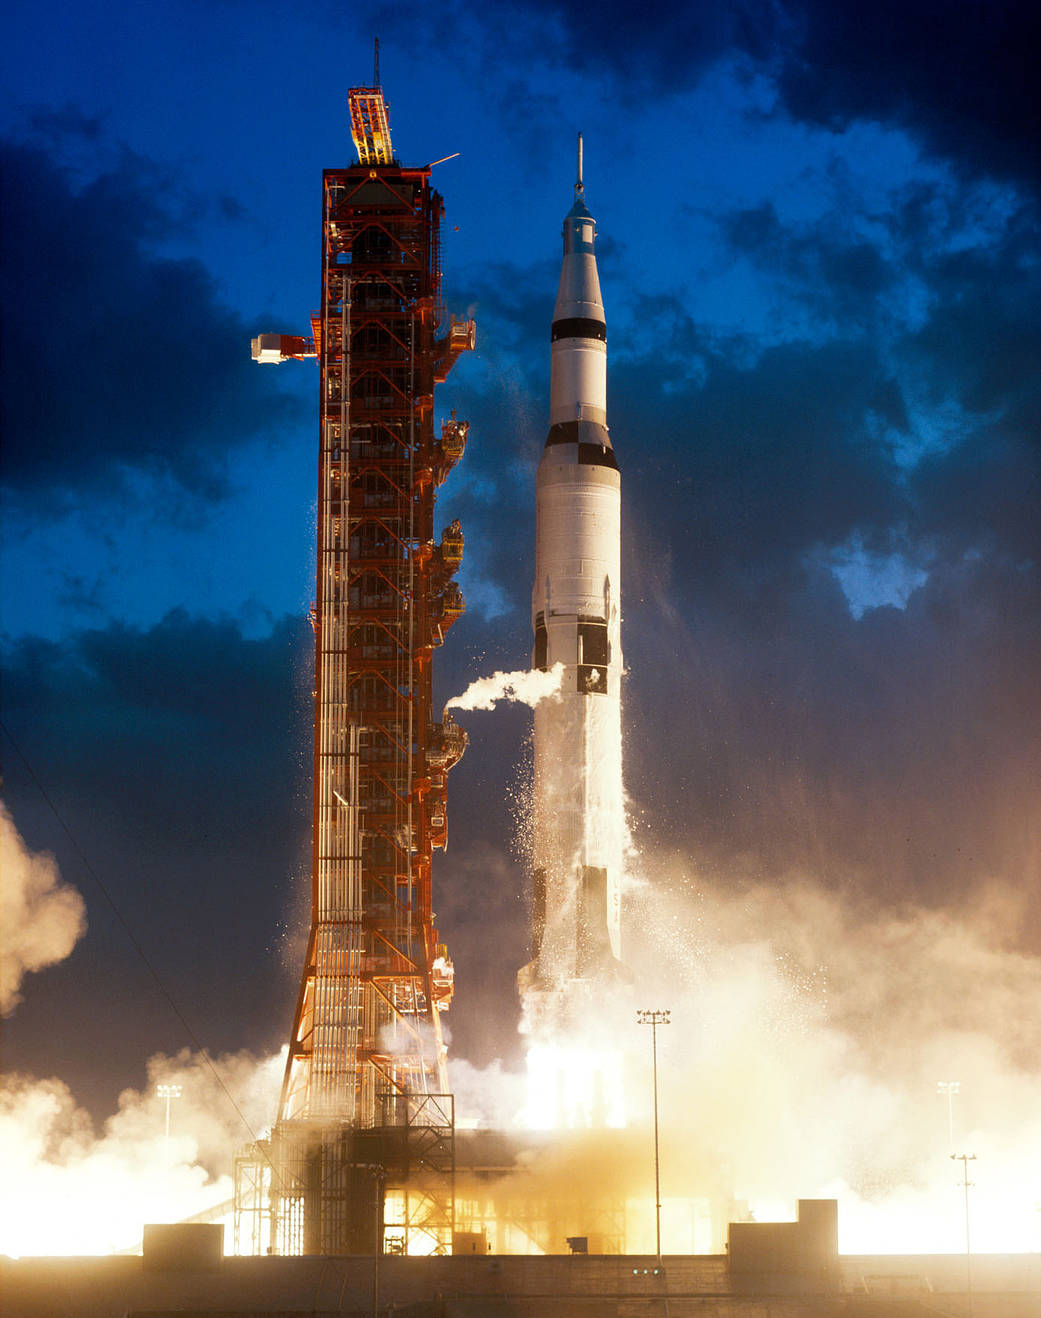 This week in 1967, the Apollo 4 mission launched from NASA’s Kennedy Space Center. 